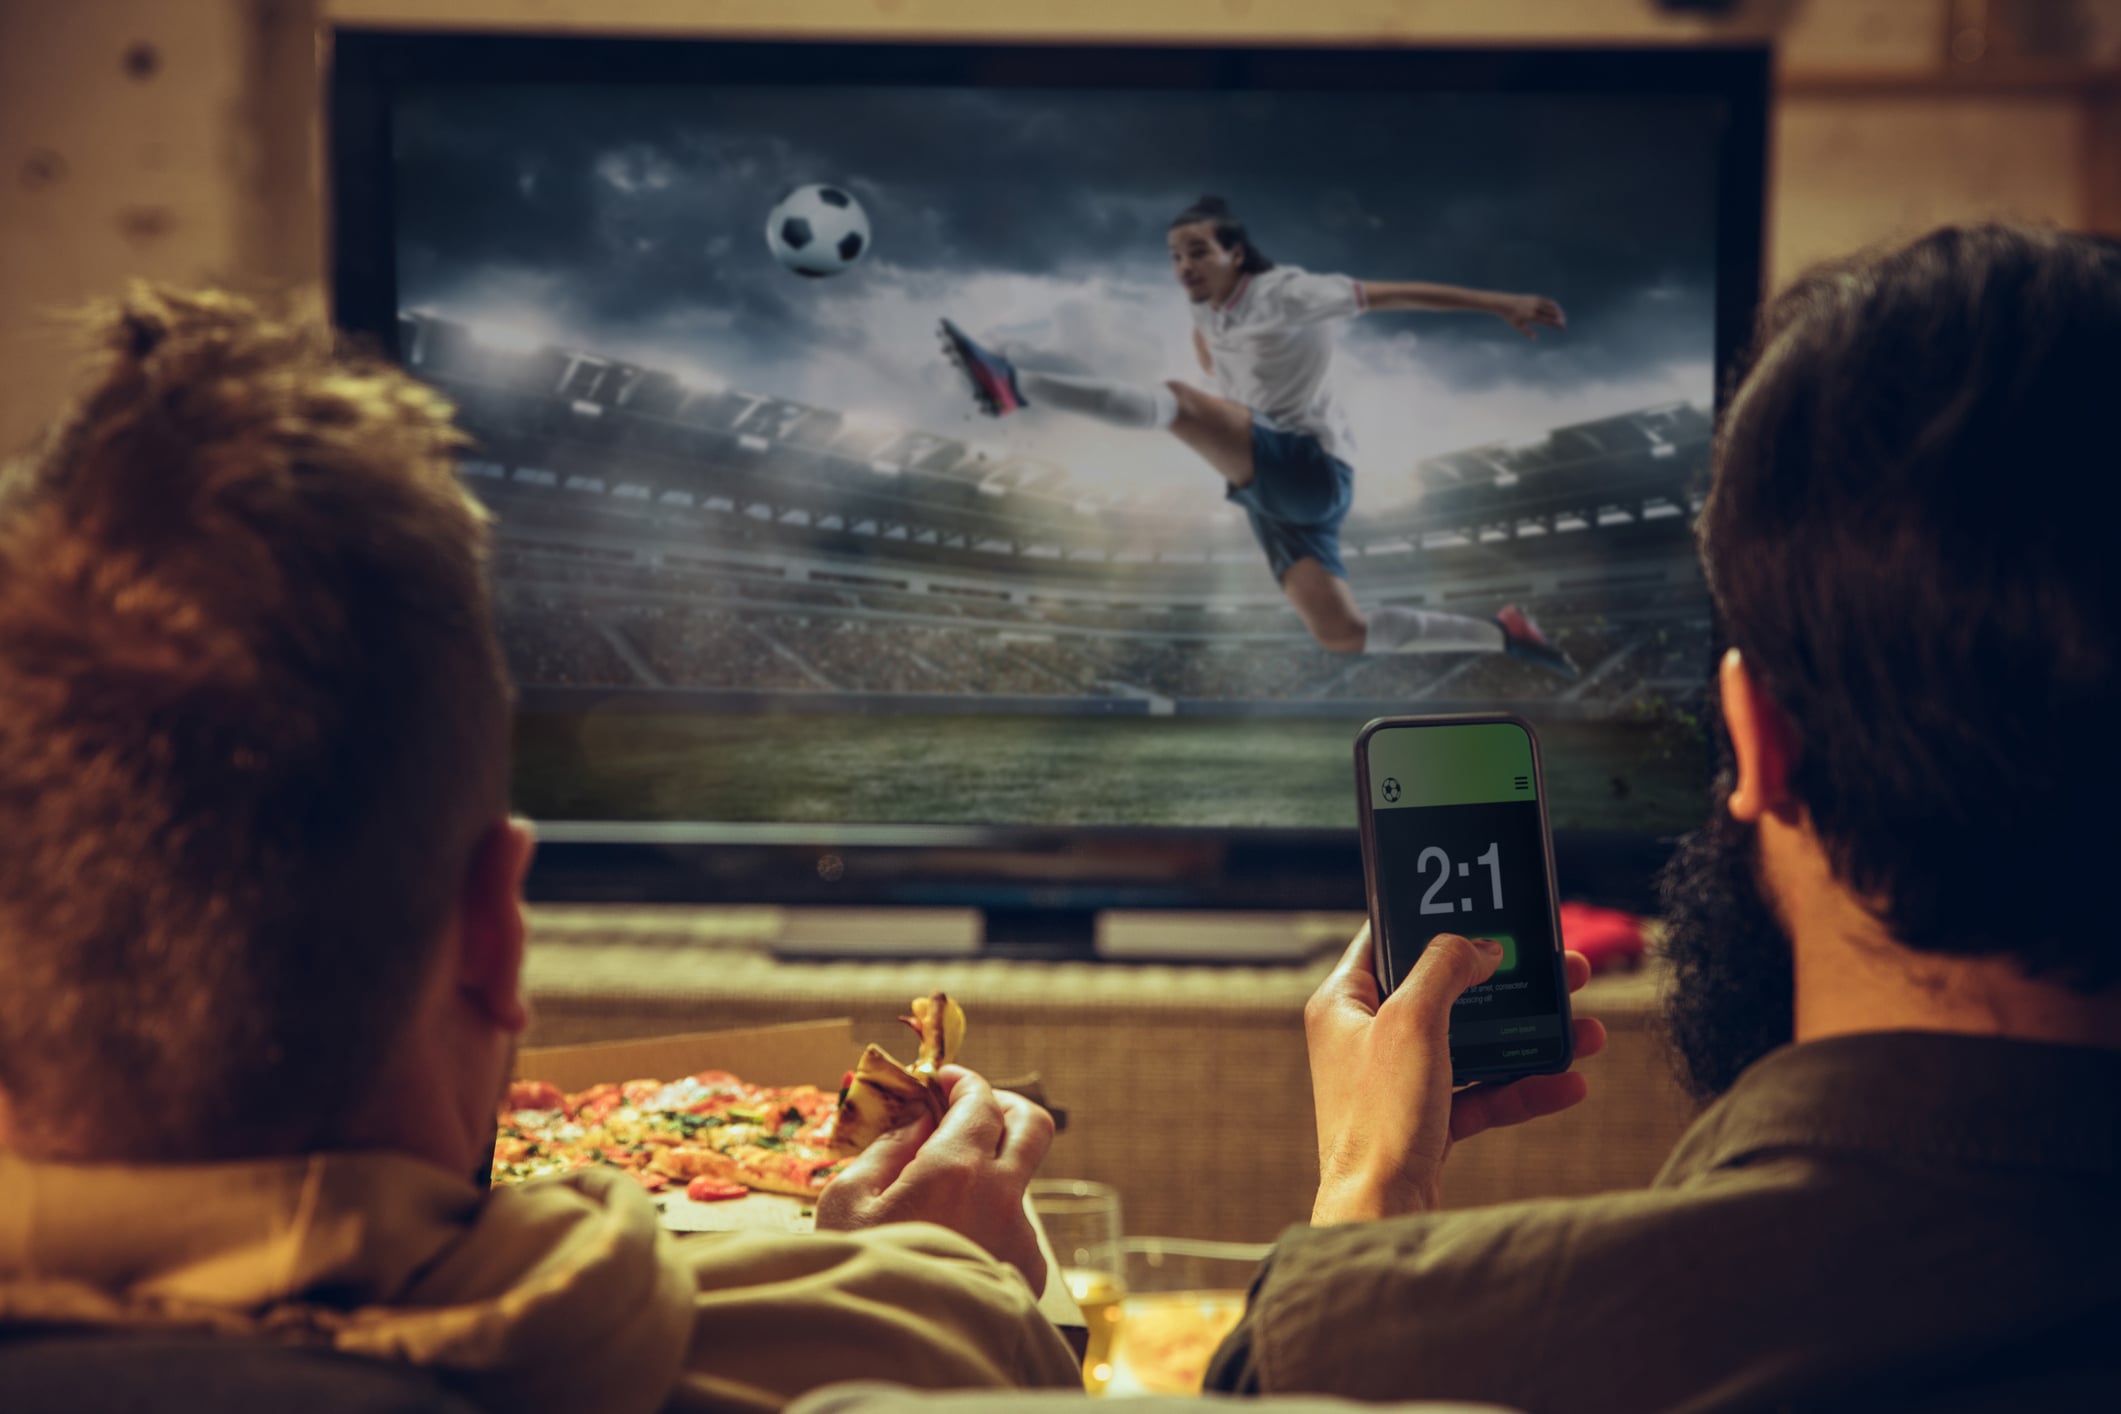 Two men watch a soccer game in their man cave with man cave loans